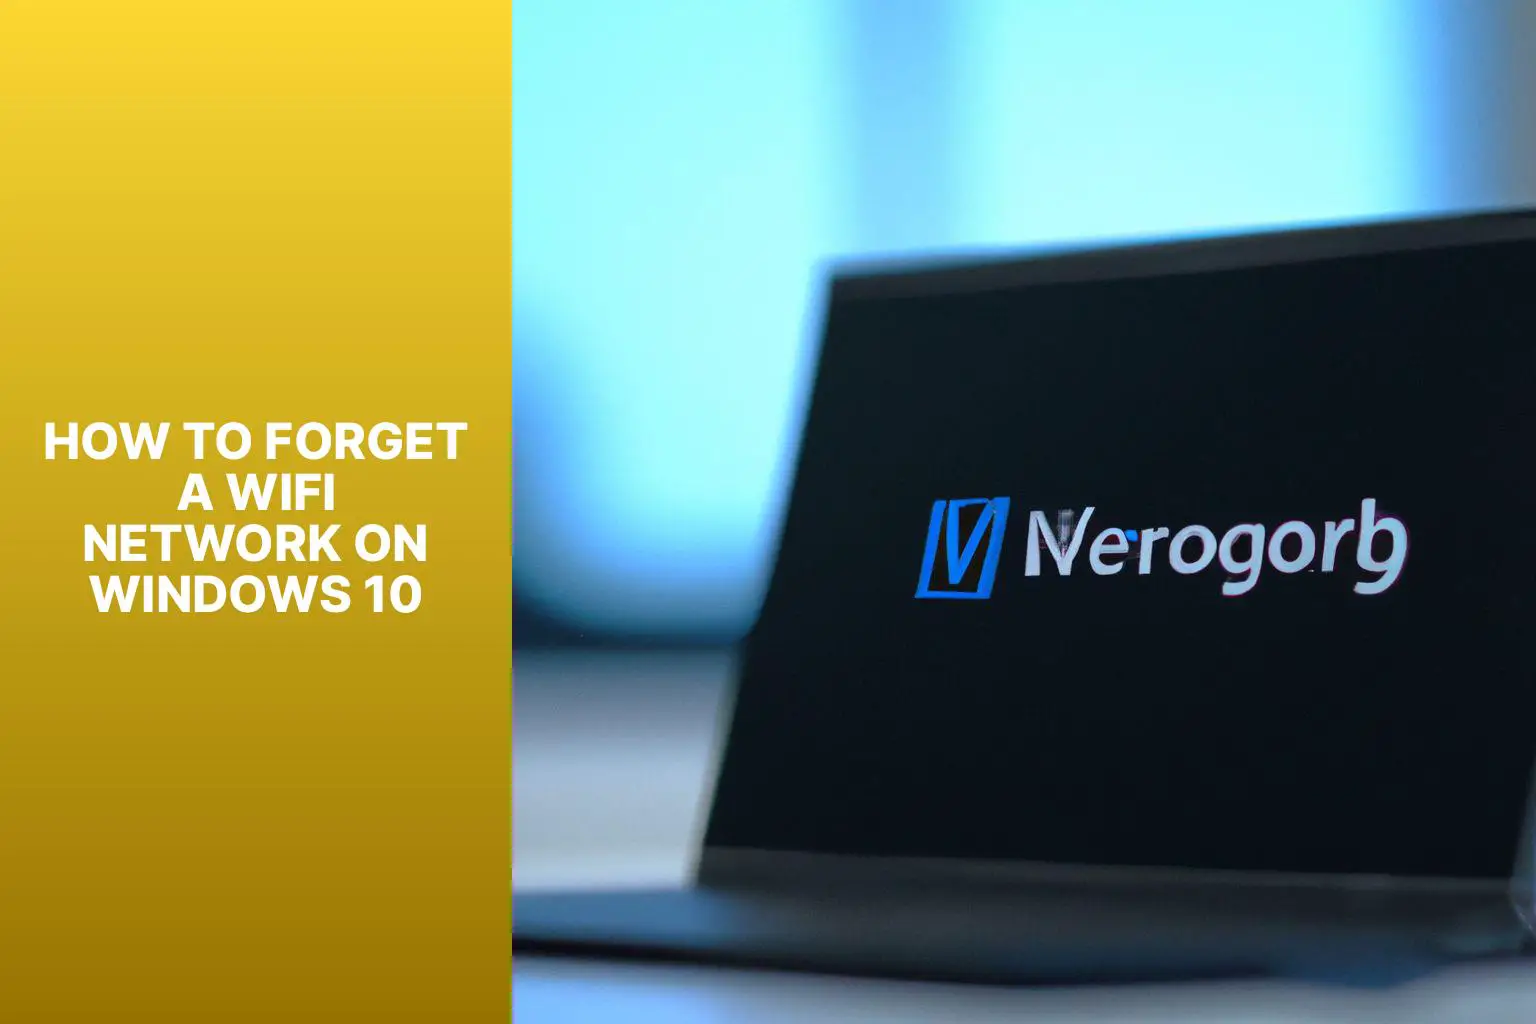 Easily Forget WiFi Networks on Windows 10 with These Simple Steps